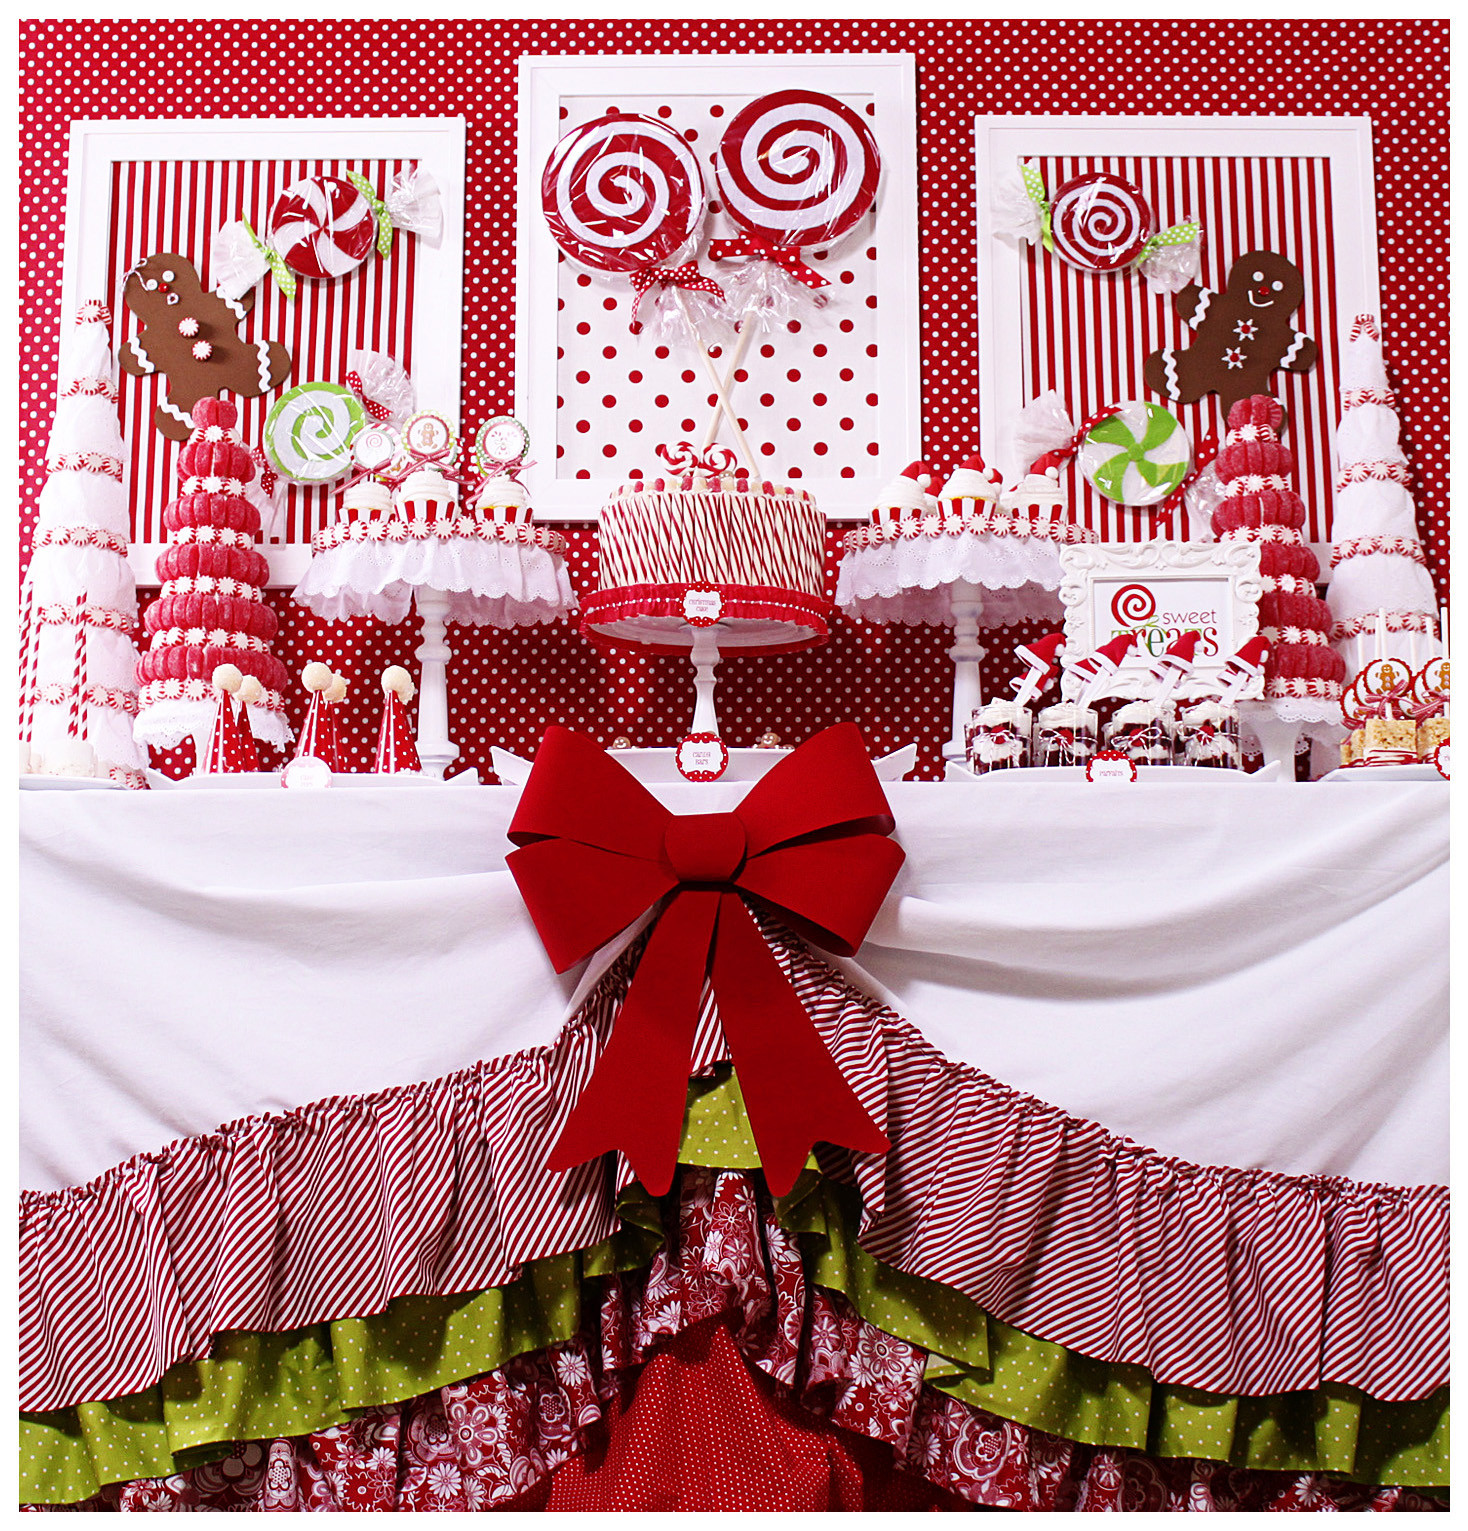 Christmas Candy Table
 Amanda s Parties To Go Candy Christmas Dessert Table